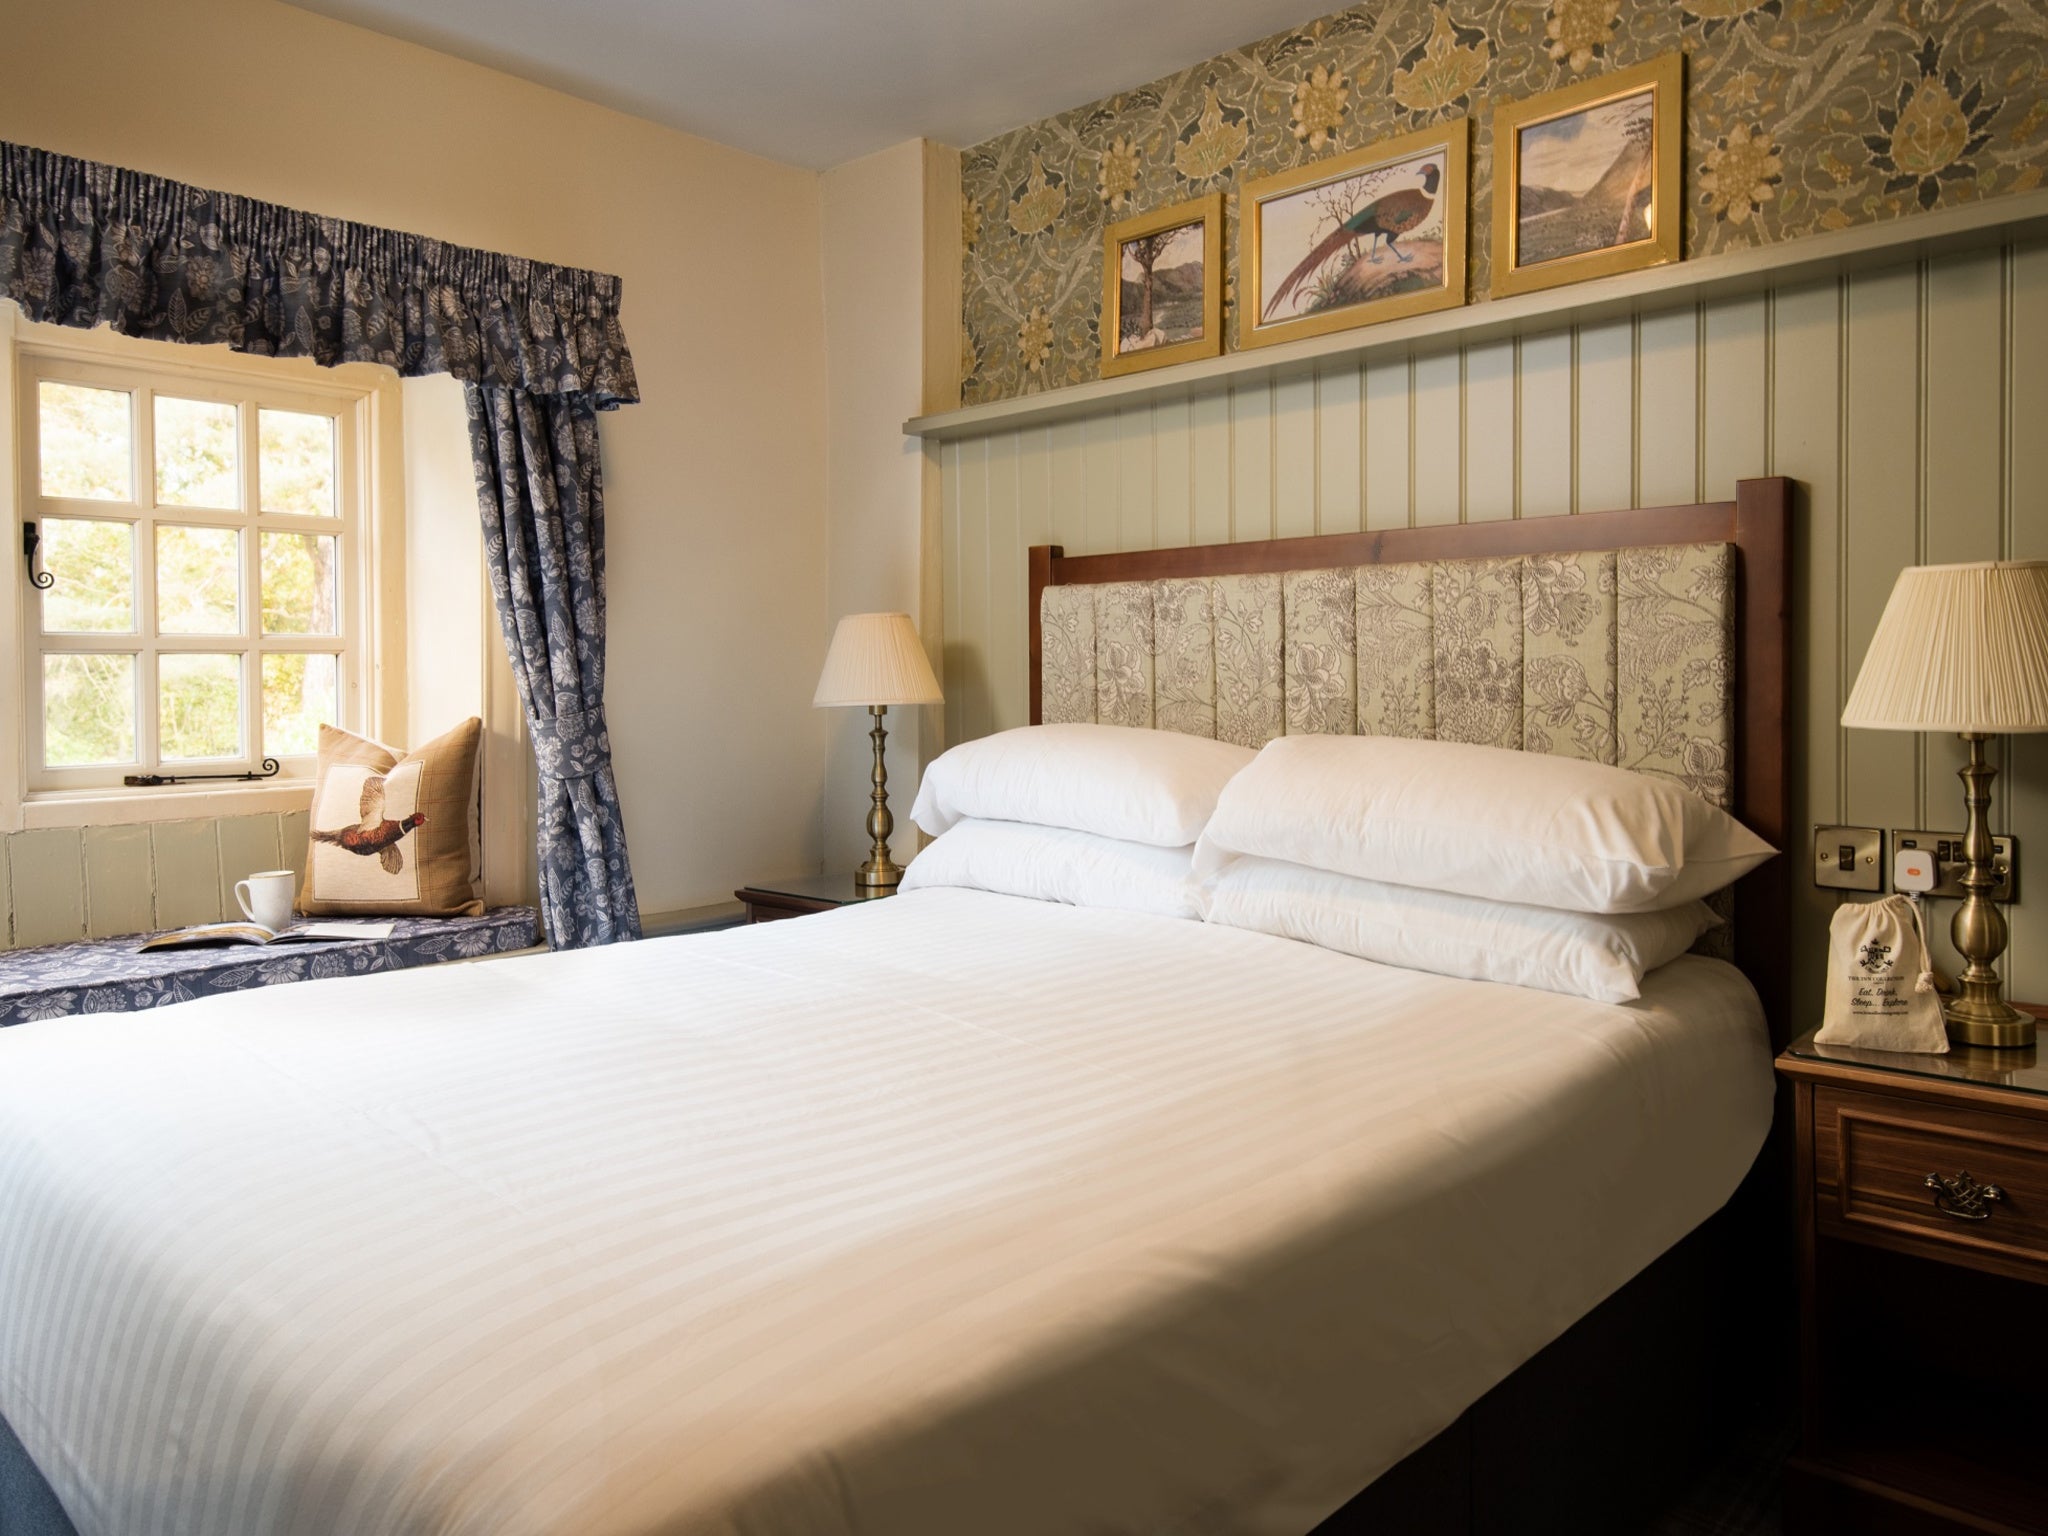 The Pheasant Inn offers 15 pretty rooms with country cottage vibes